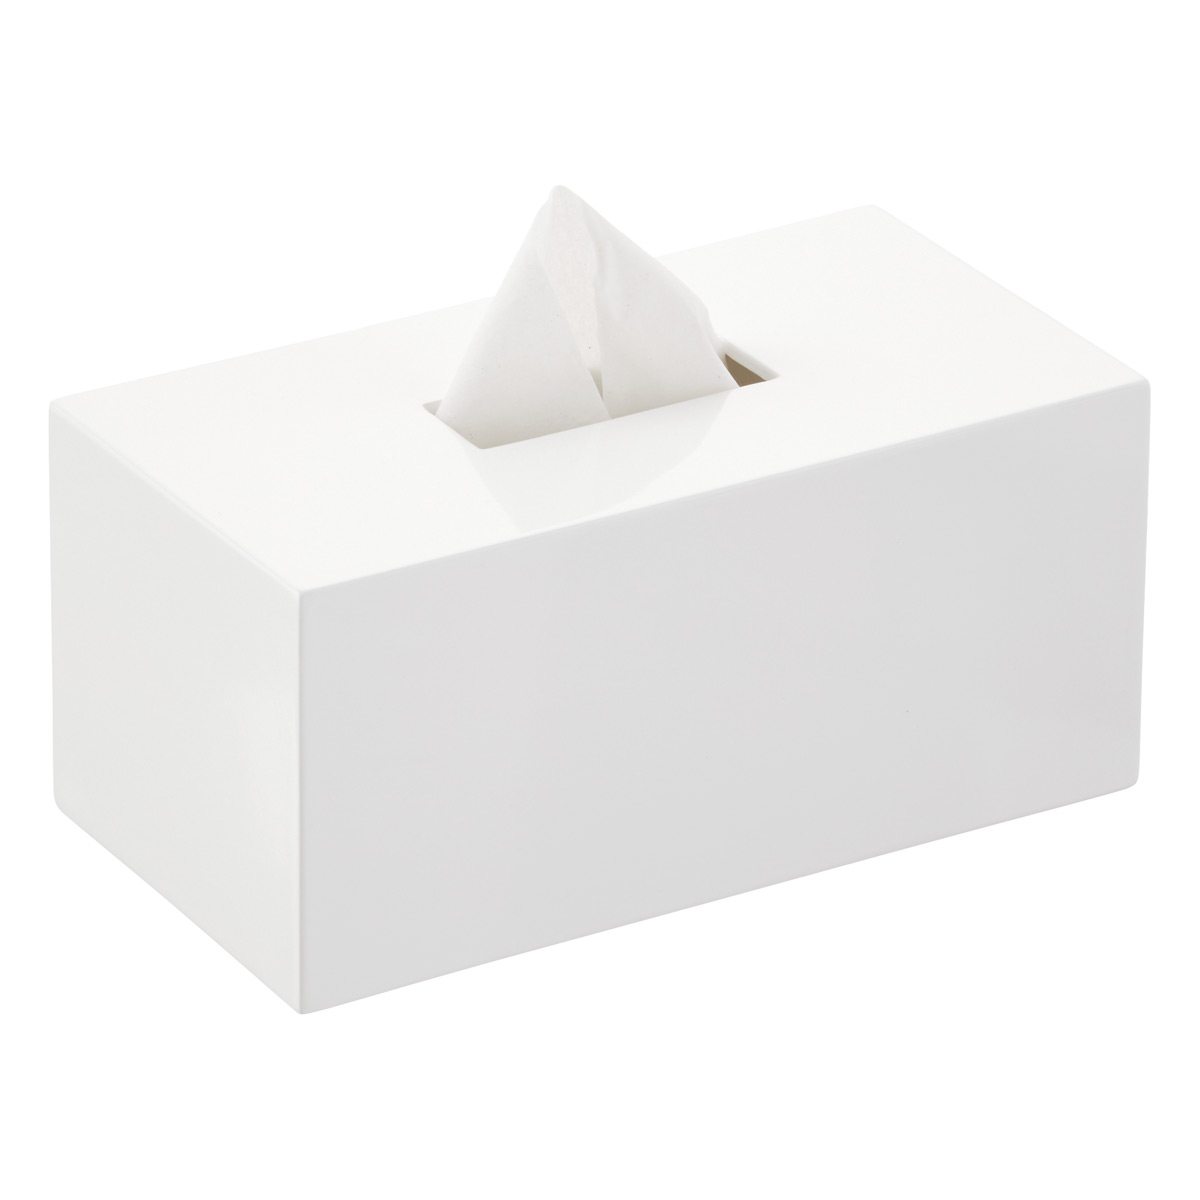 Lacquered Rectangular Tissue Box Cover | The Container Store